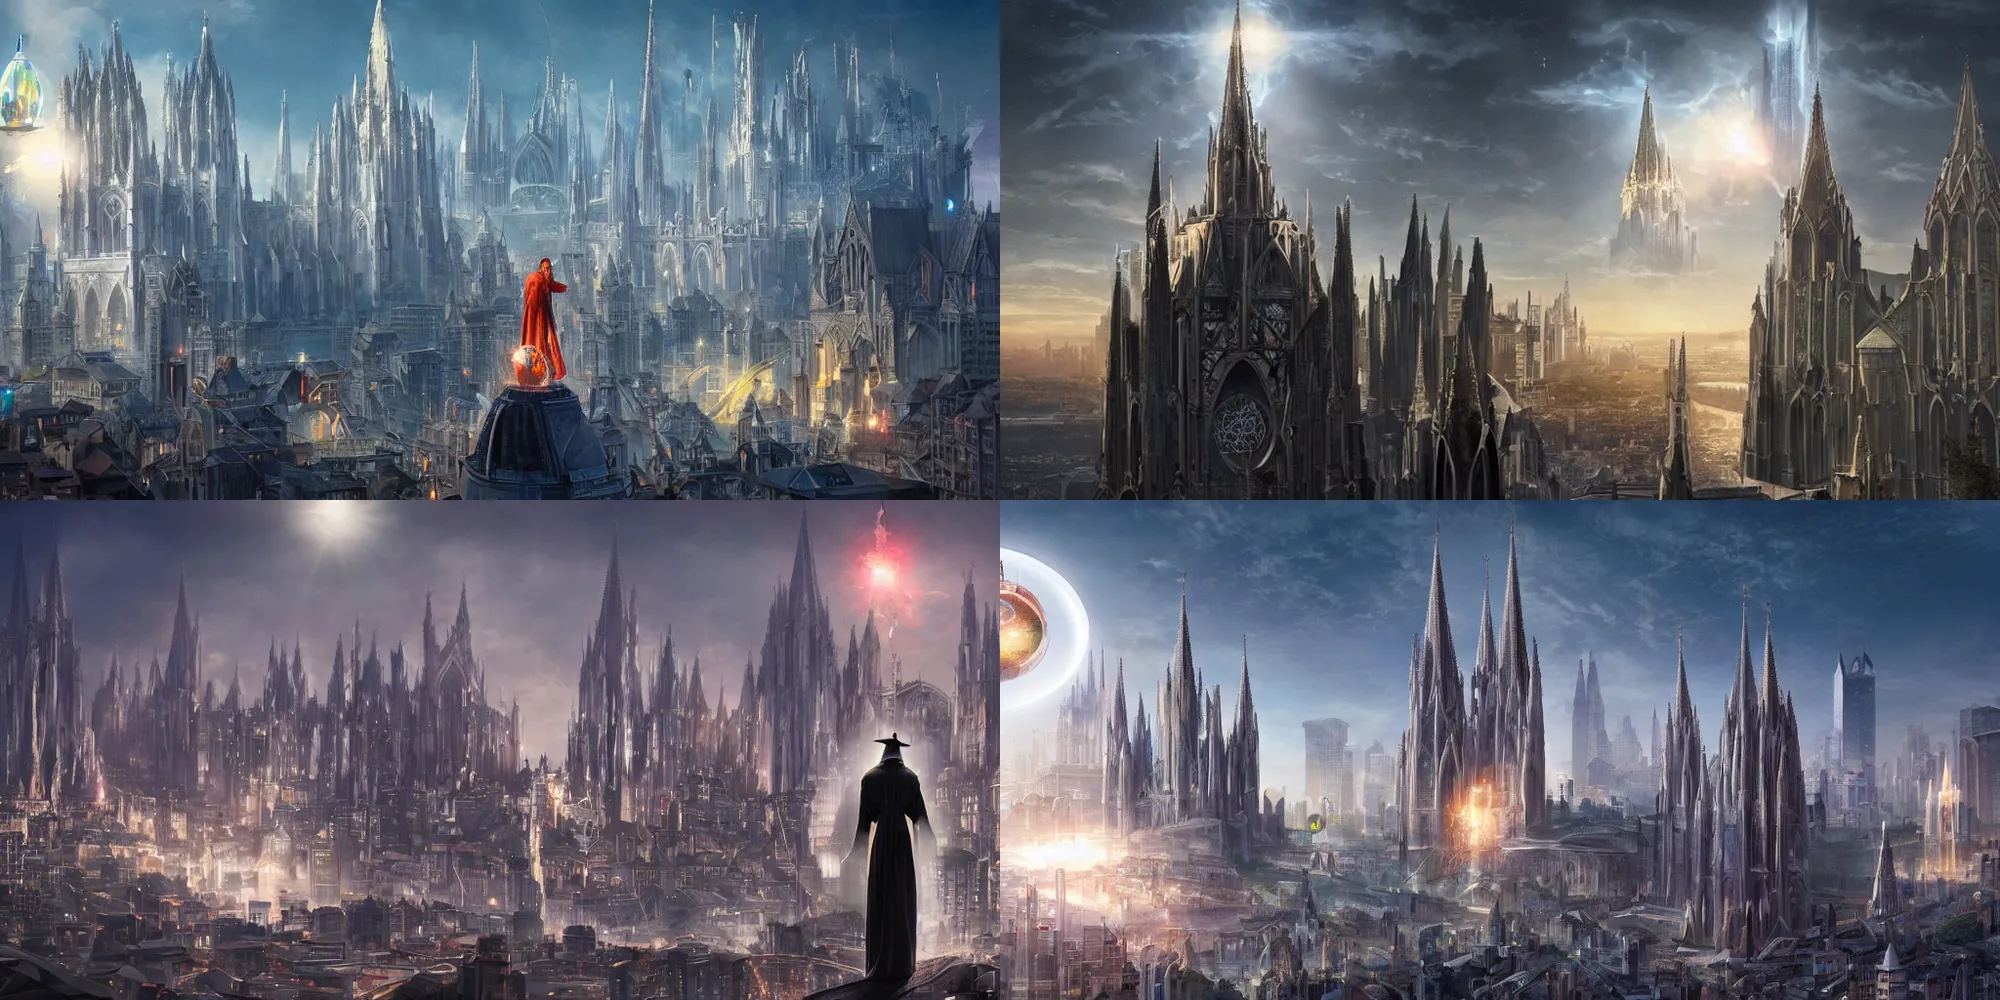 Prompt: A futuristic cityscape, dominated by the massive tower of a cathedral. A wizard stands on its roof, holding up a glowing orb